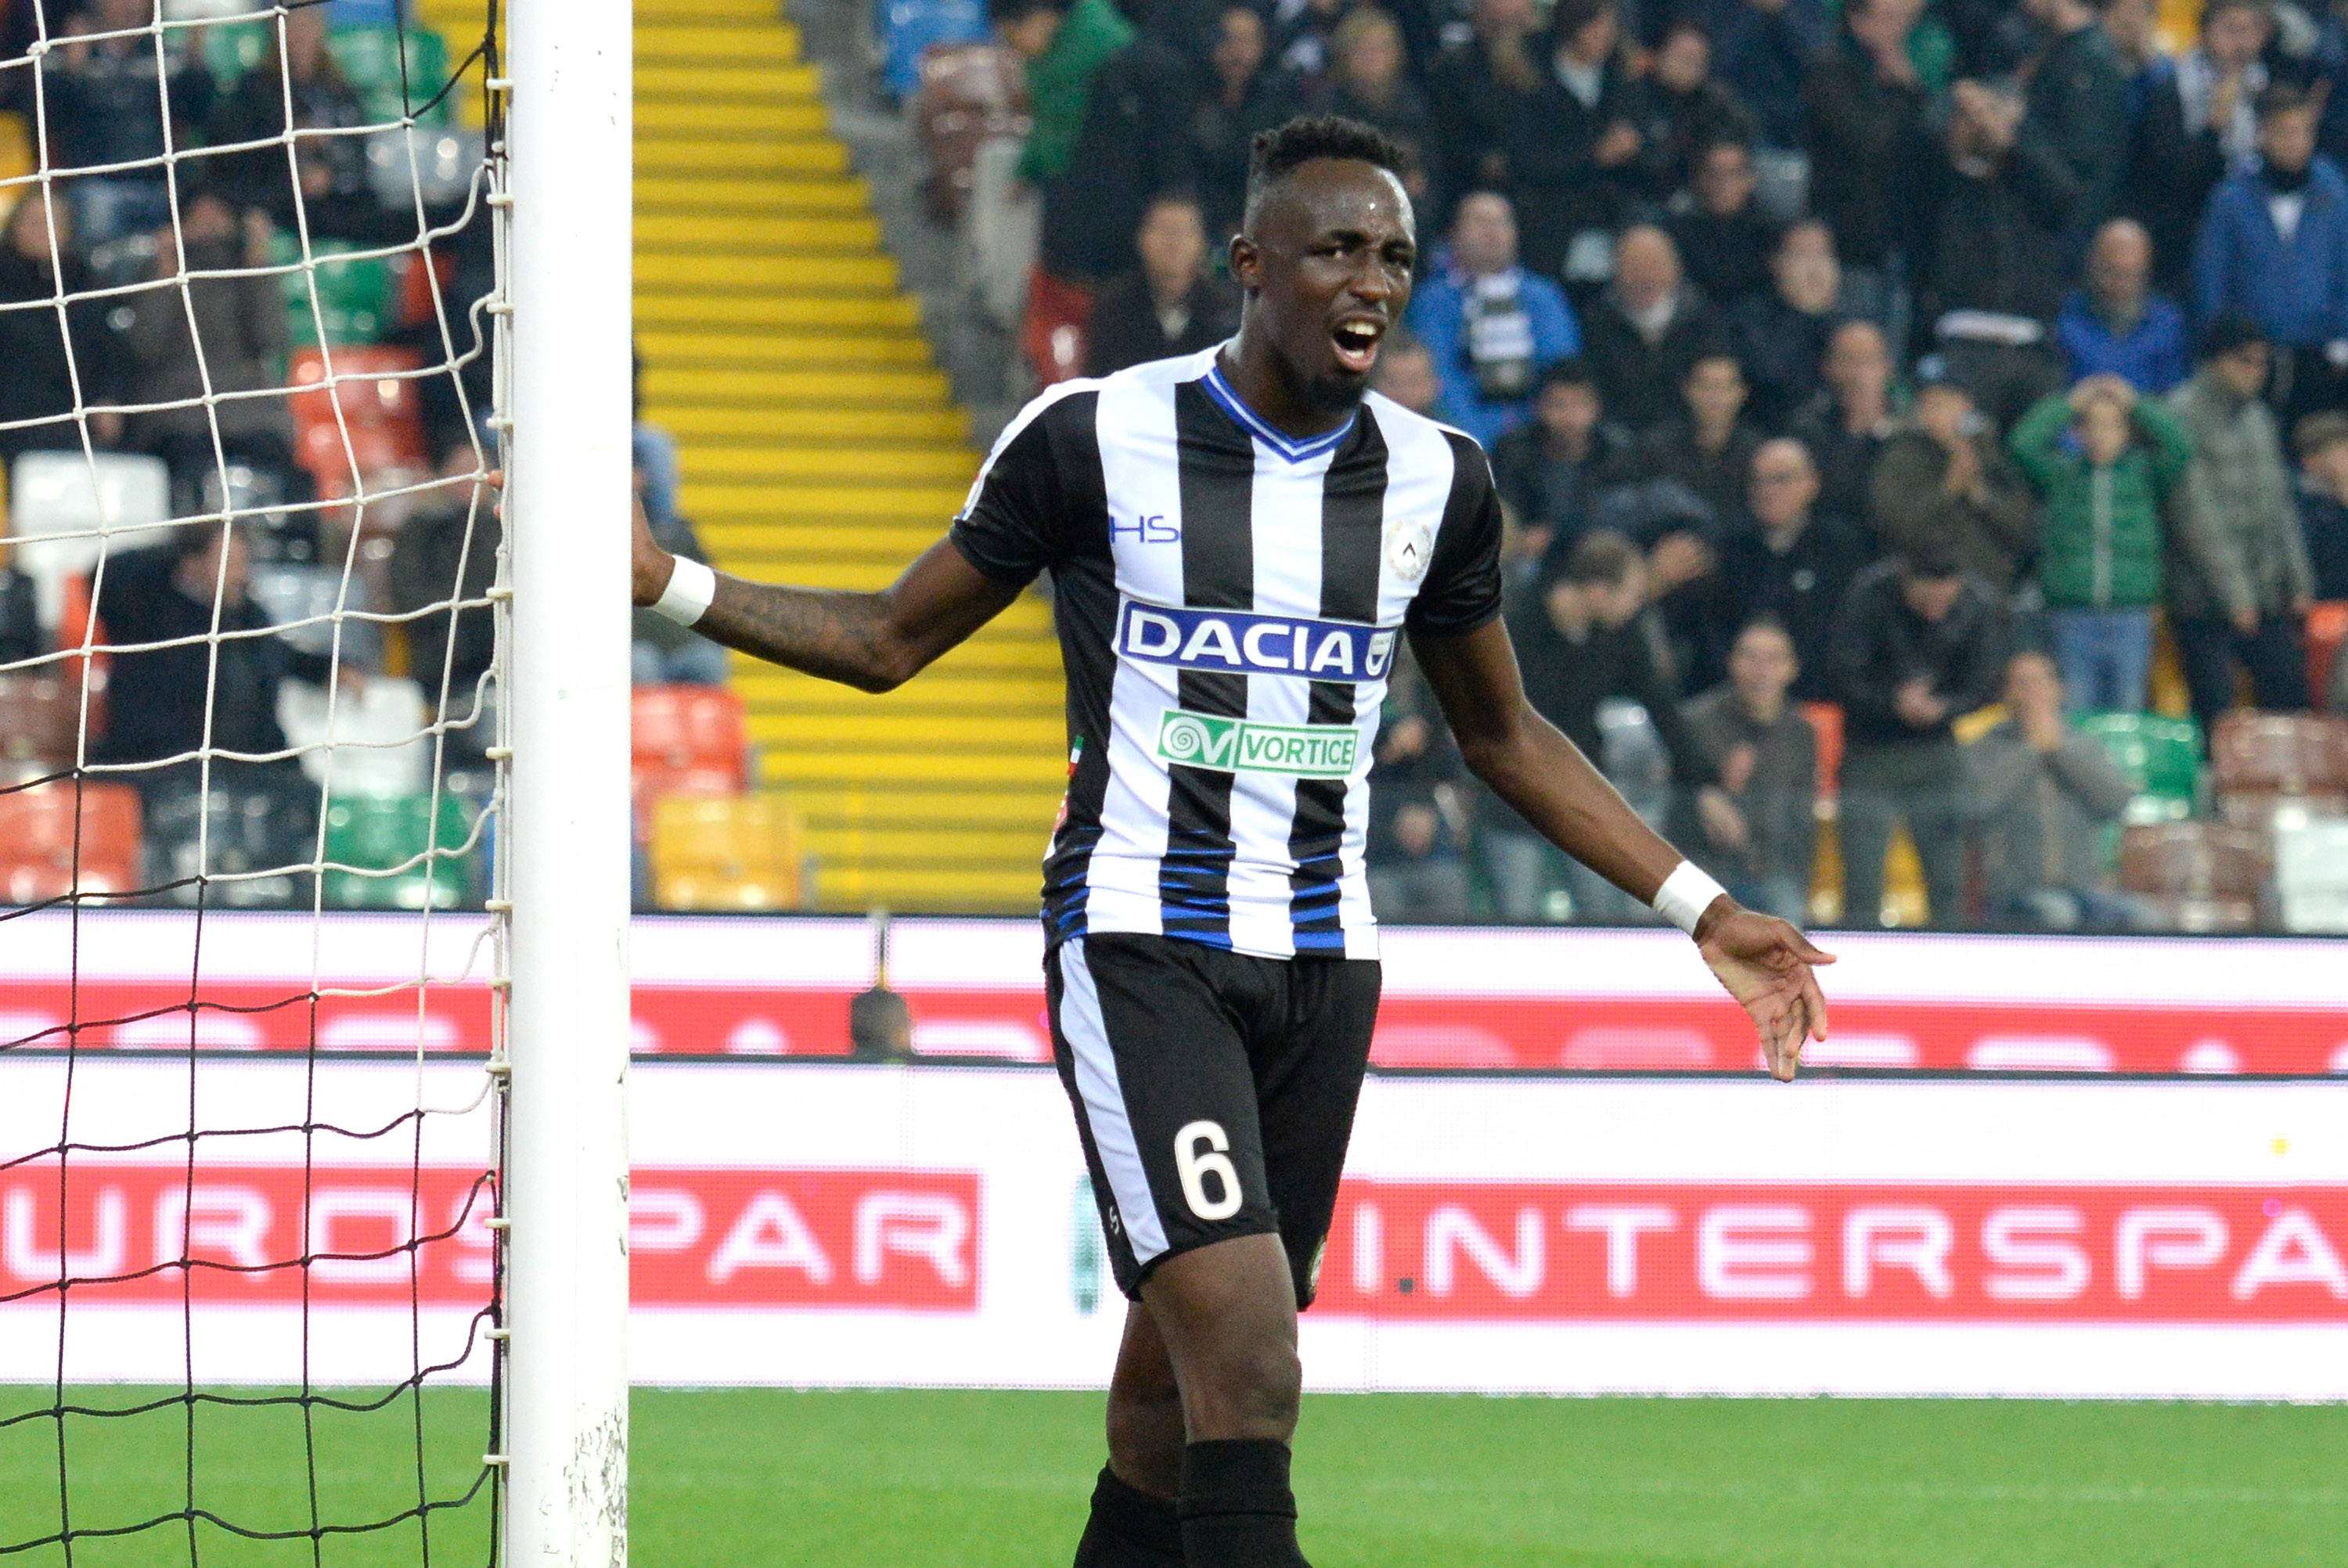 Seko Foafana On Inter & Atalanta Links: “I Don’t Know But My Time At Udinese Is Over”